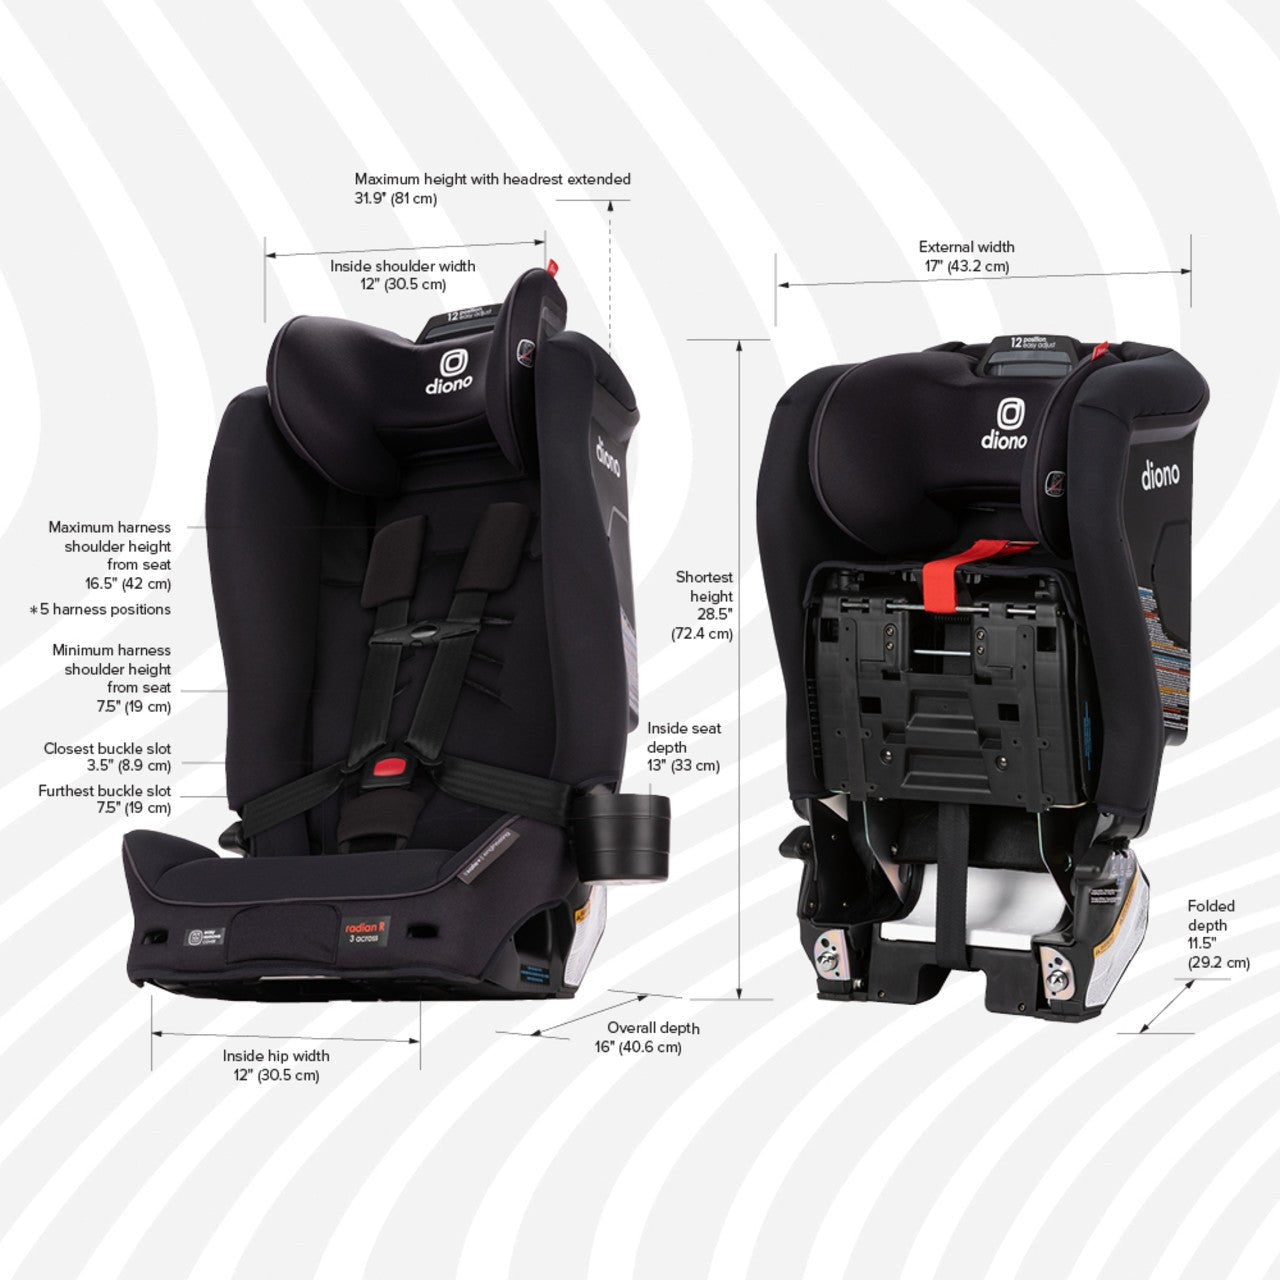 Diono Radian 3 R Safe+ Convertible Car Seat - ANB Baby -677726506309$100 - $300